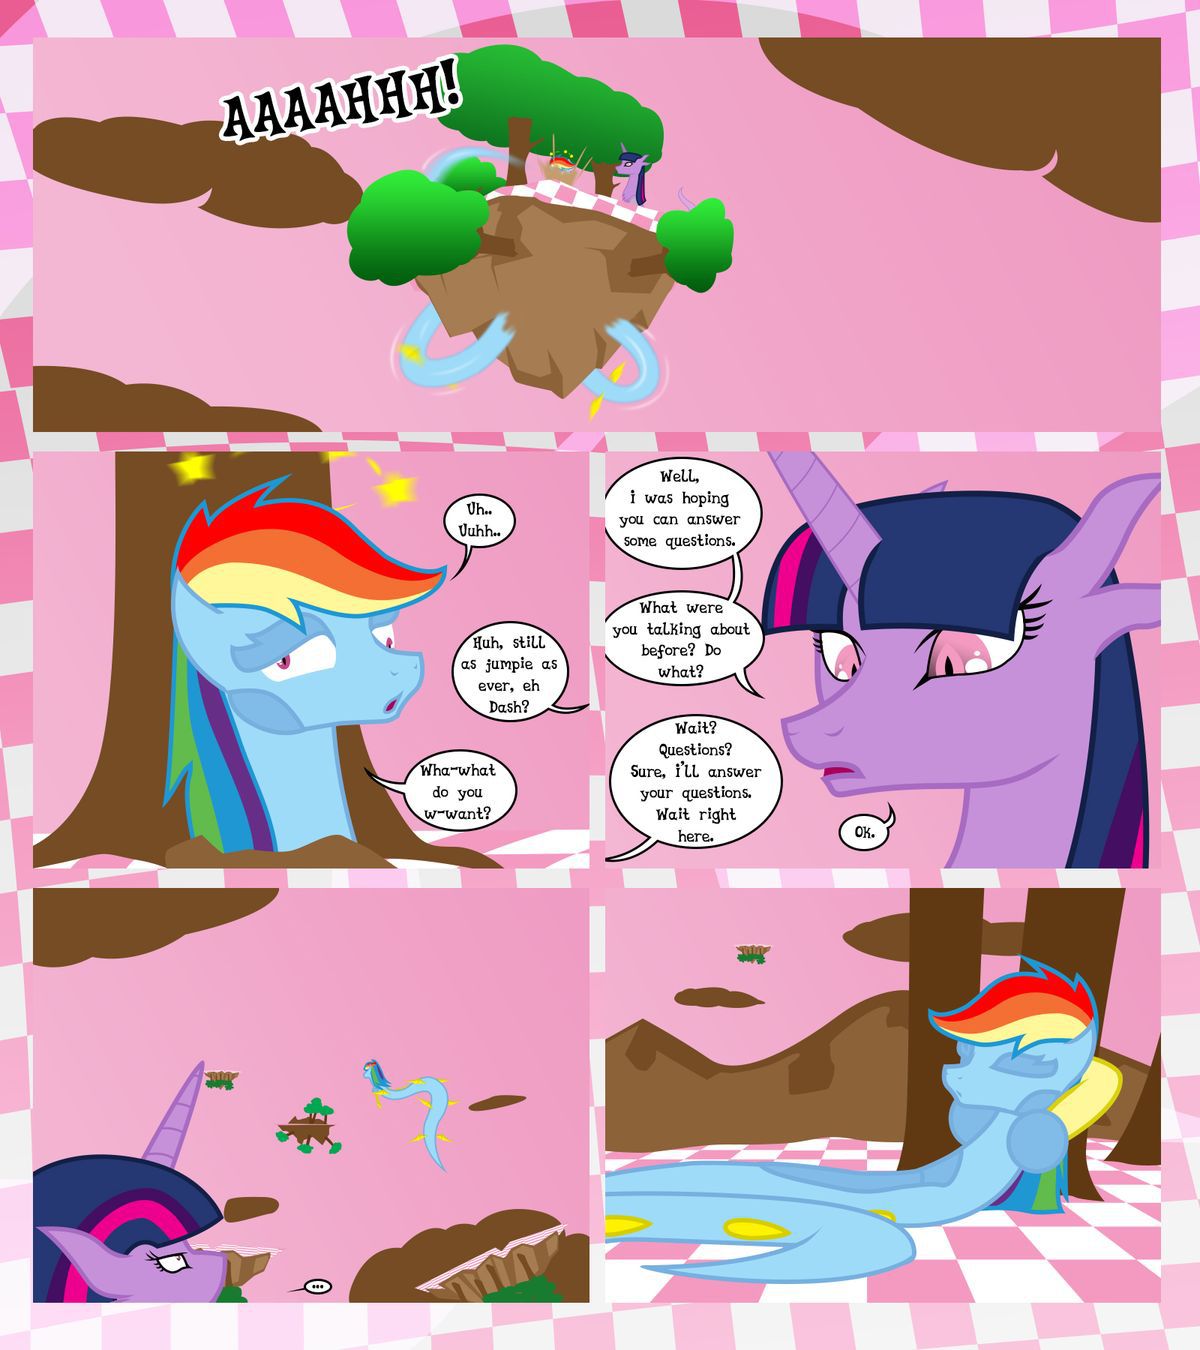 [GatesMcCloud] Cutie Mark Crusaders 10k: Chapter 3 - The Lost (My Little Pony: Friendship is Magic) [English] [Ongoing] 42